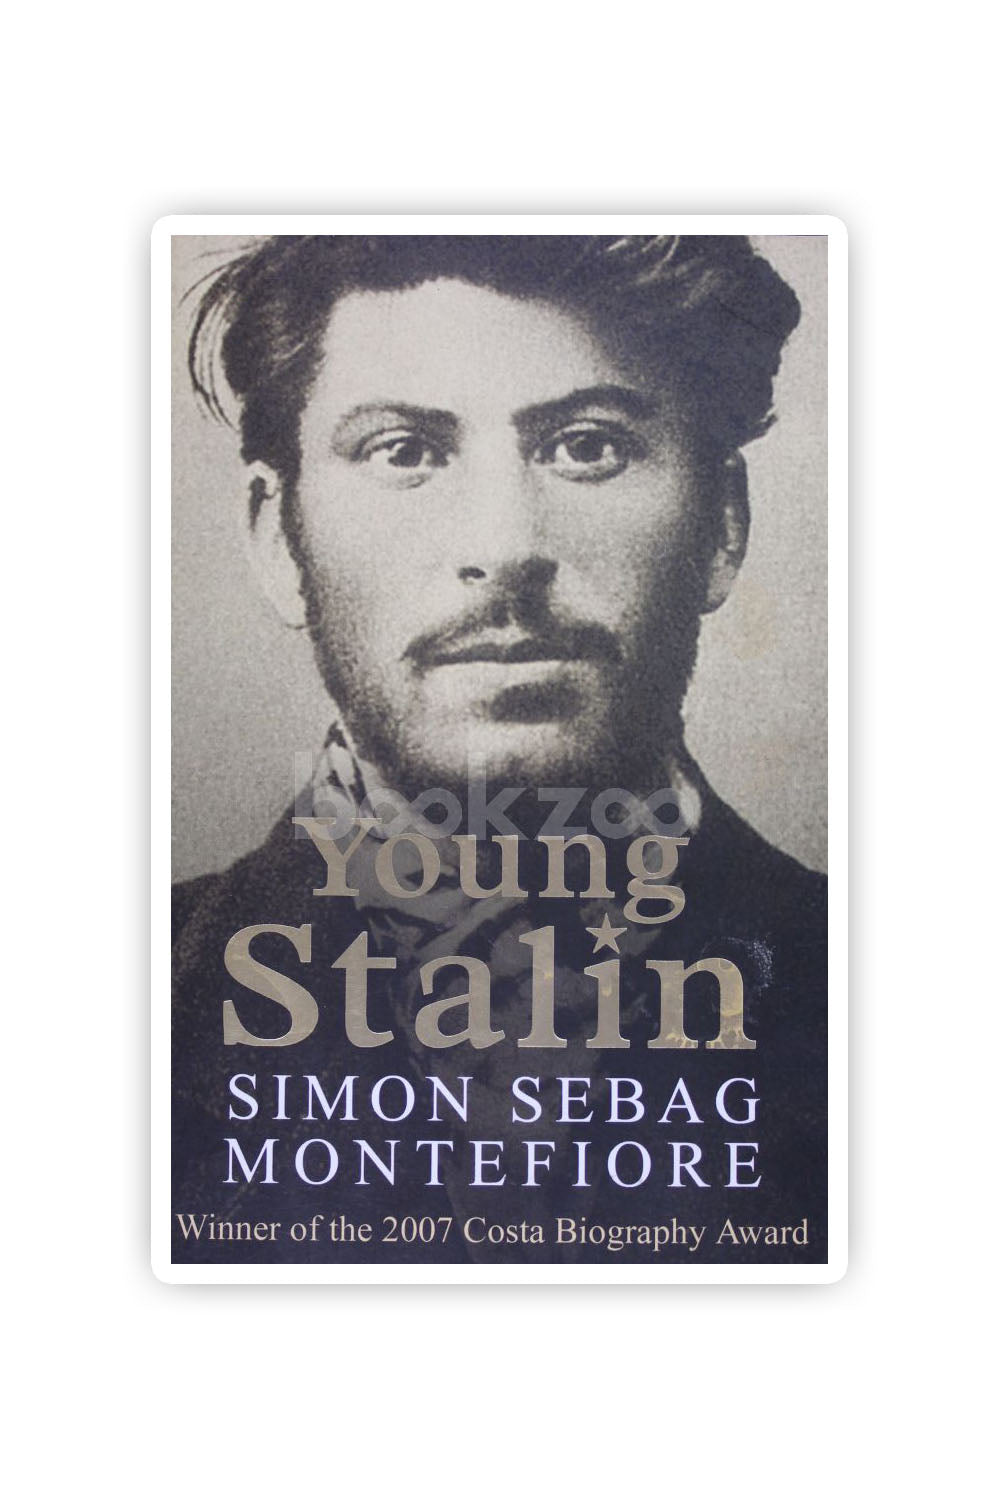 bookstore　Simon　Young　Montefiore　by　Online　—　Buy　Sebag　Stalin　at